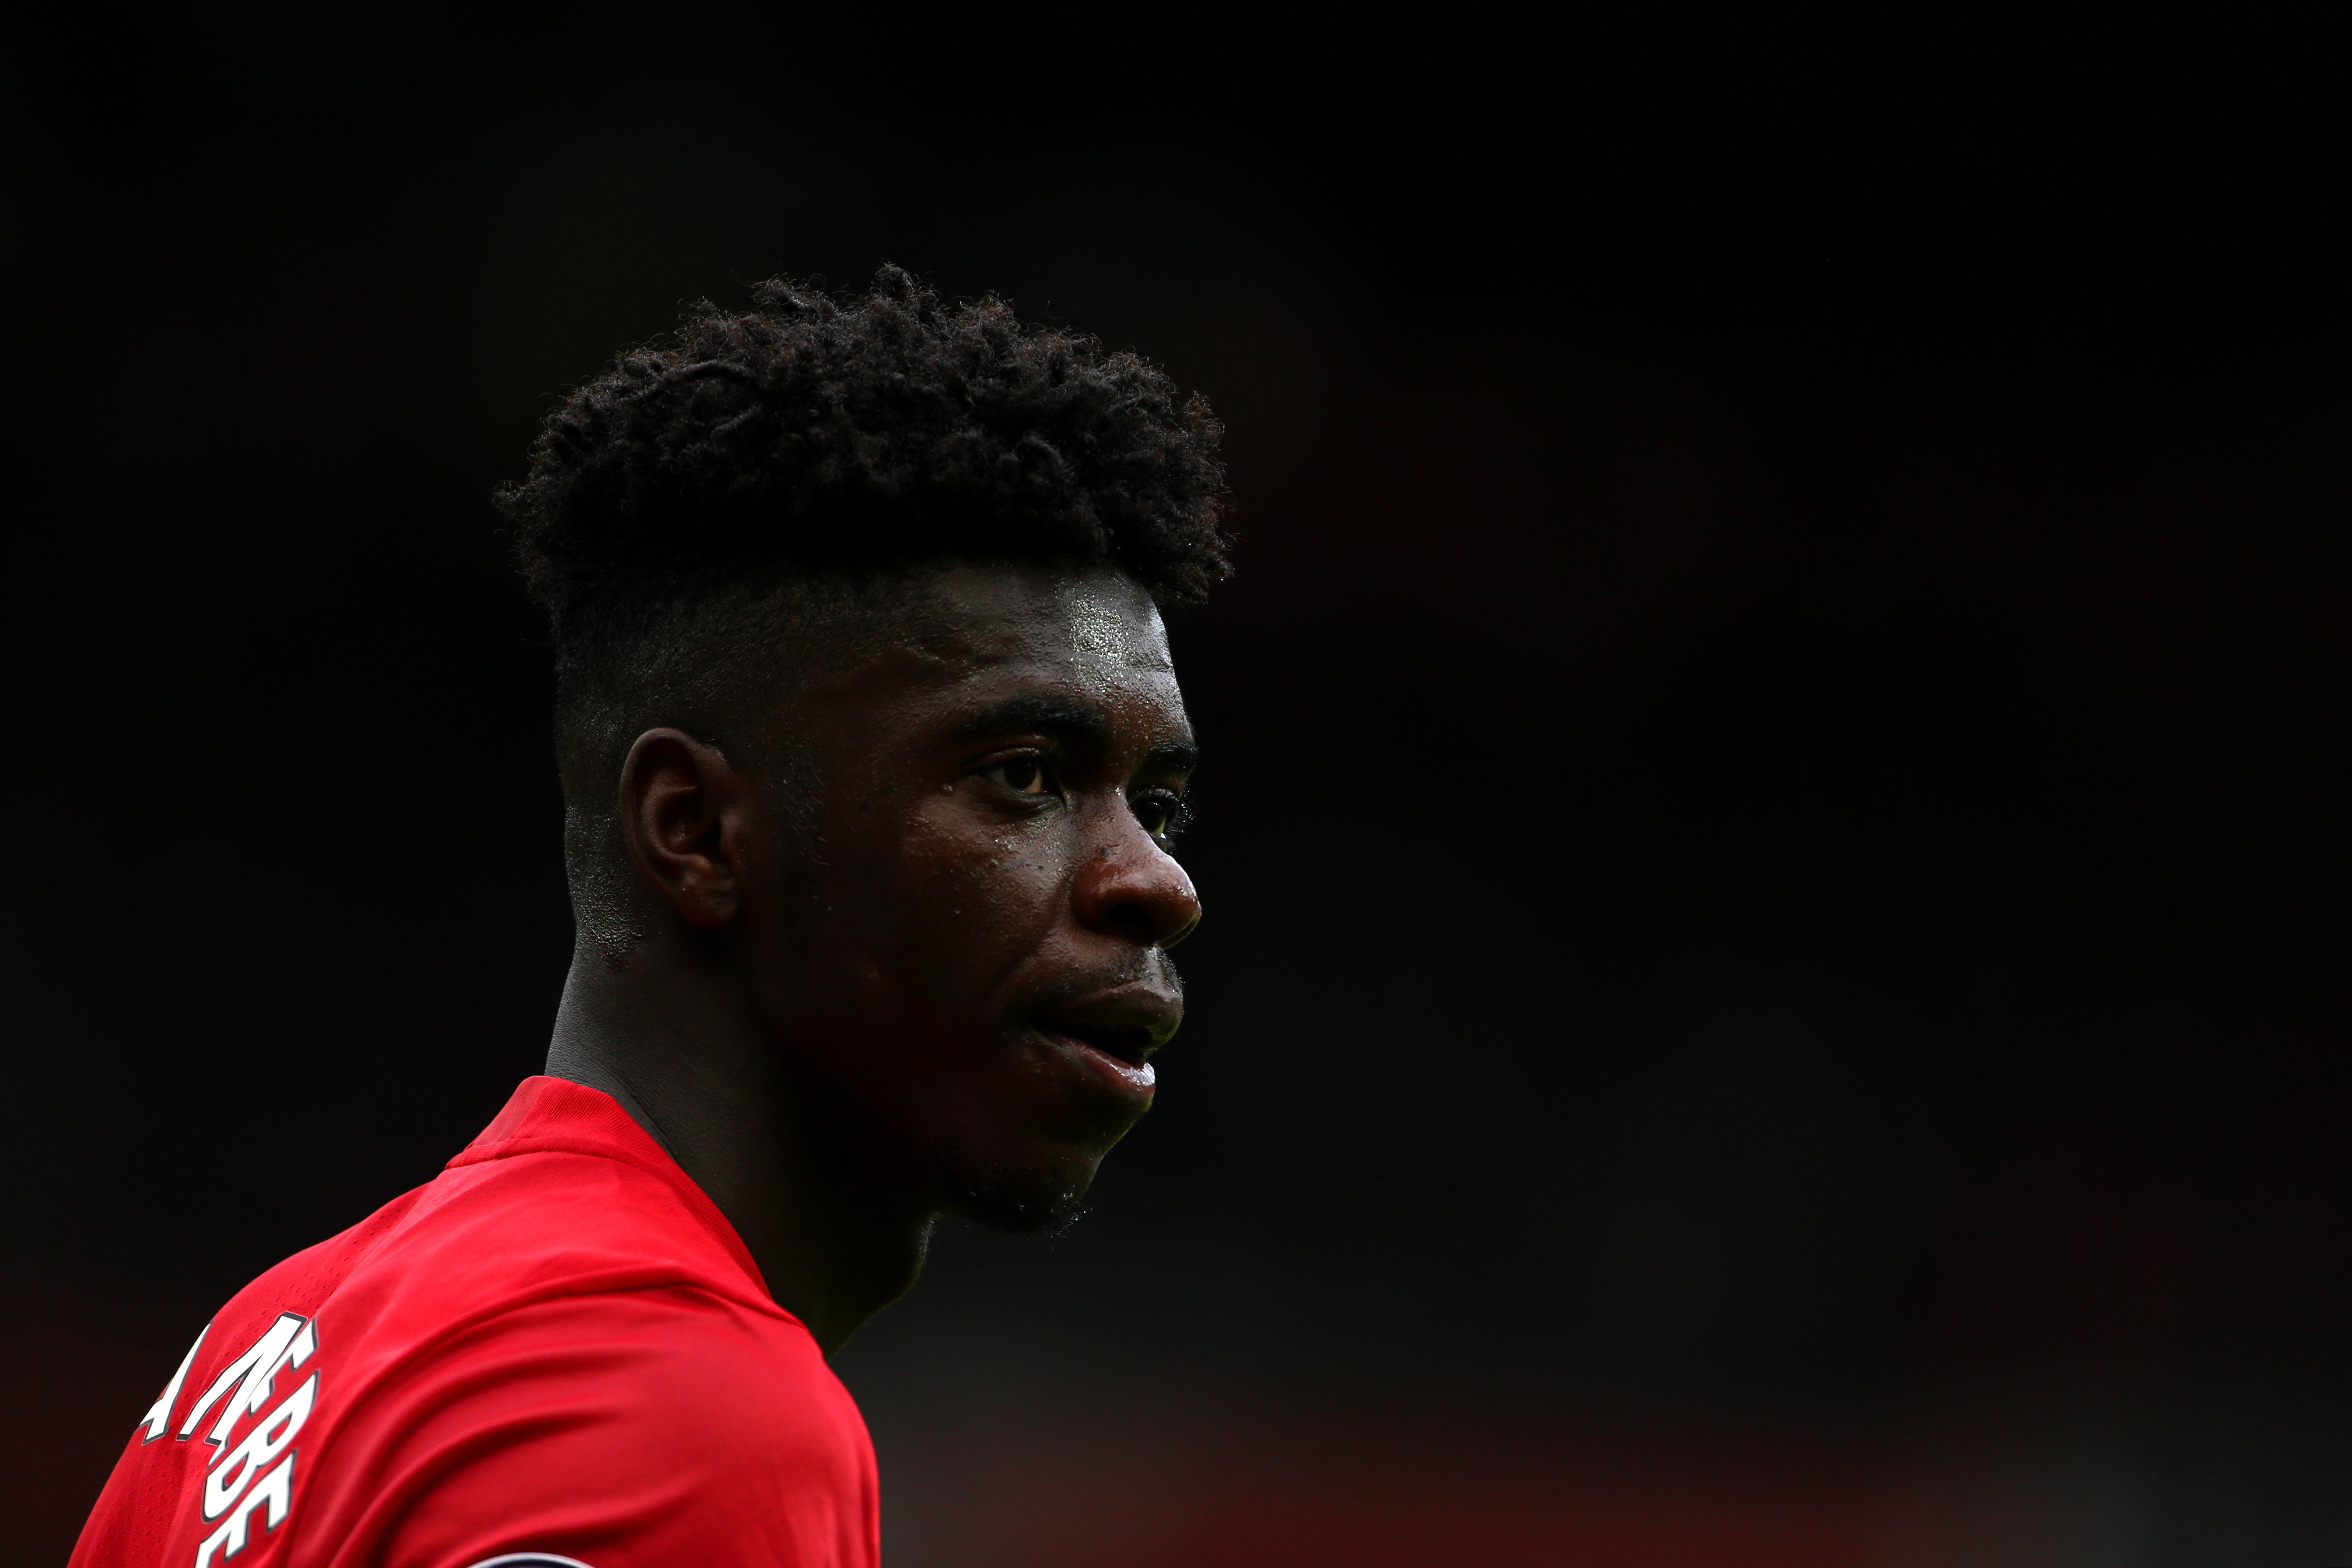 MANCHESTER, ENGLAND - MAY 21: Axel Tuanzebe of Manchester United during the Premier League match between Manchester United and Crystal Palace at Old Trafford on May 21, 2017 in Manchester, England. (Photo by Dave Thompson/Getty Images)